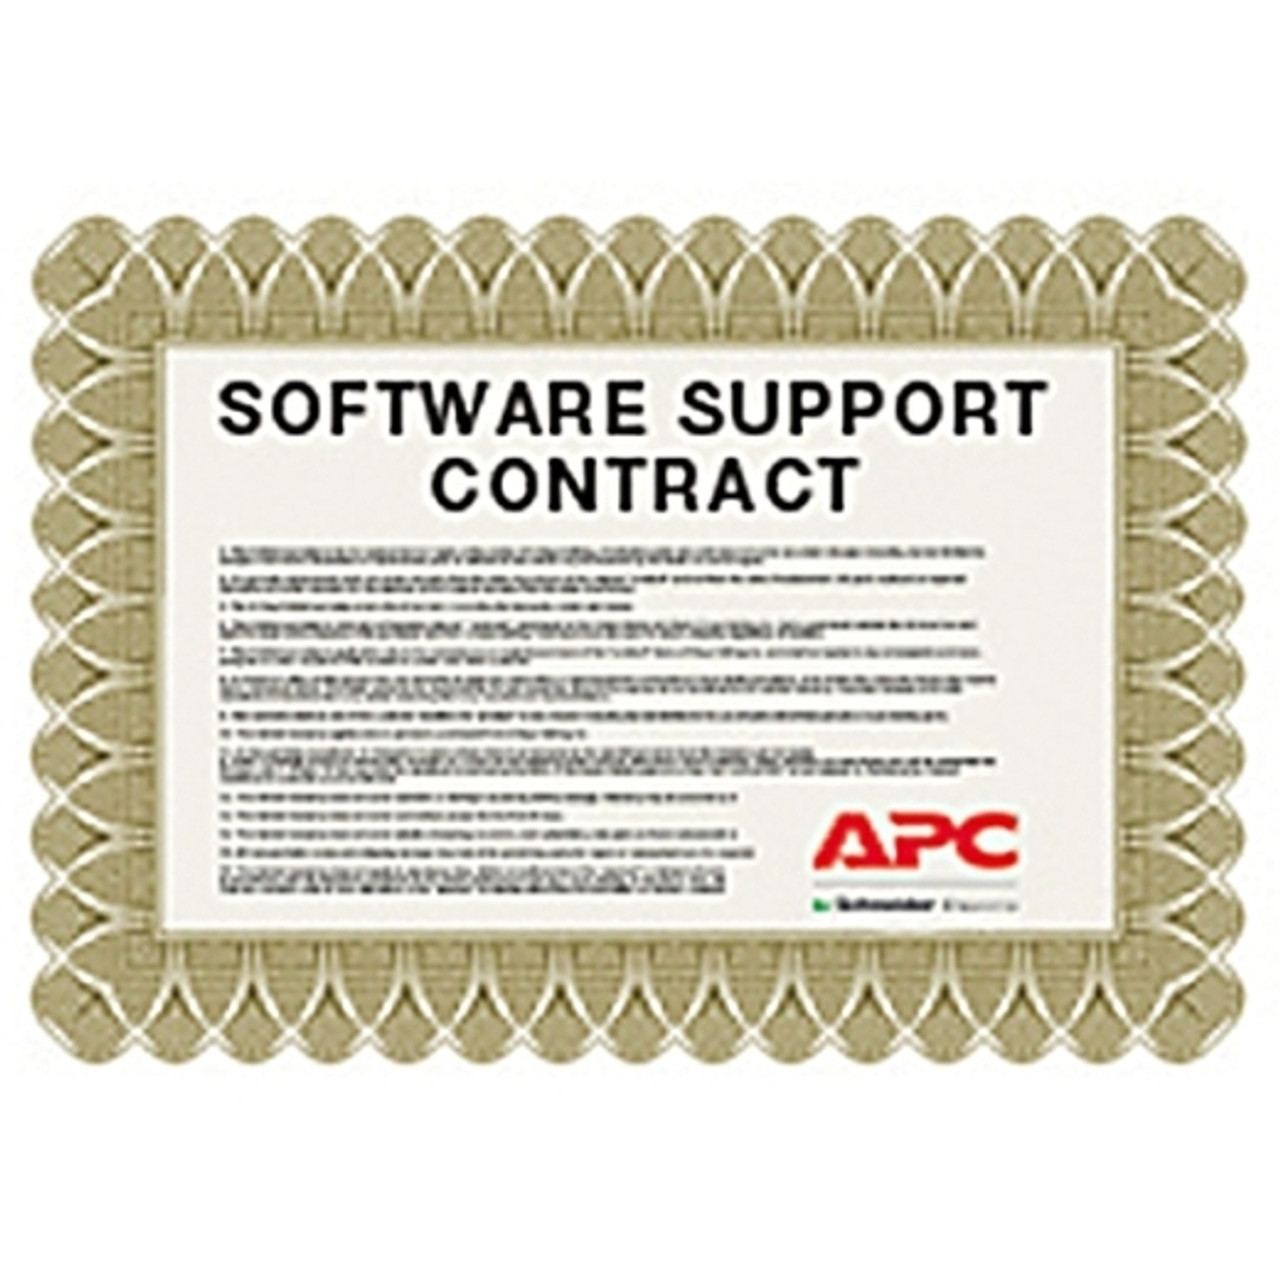 APC WITPC3YR10 warranty/support extension